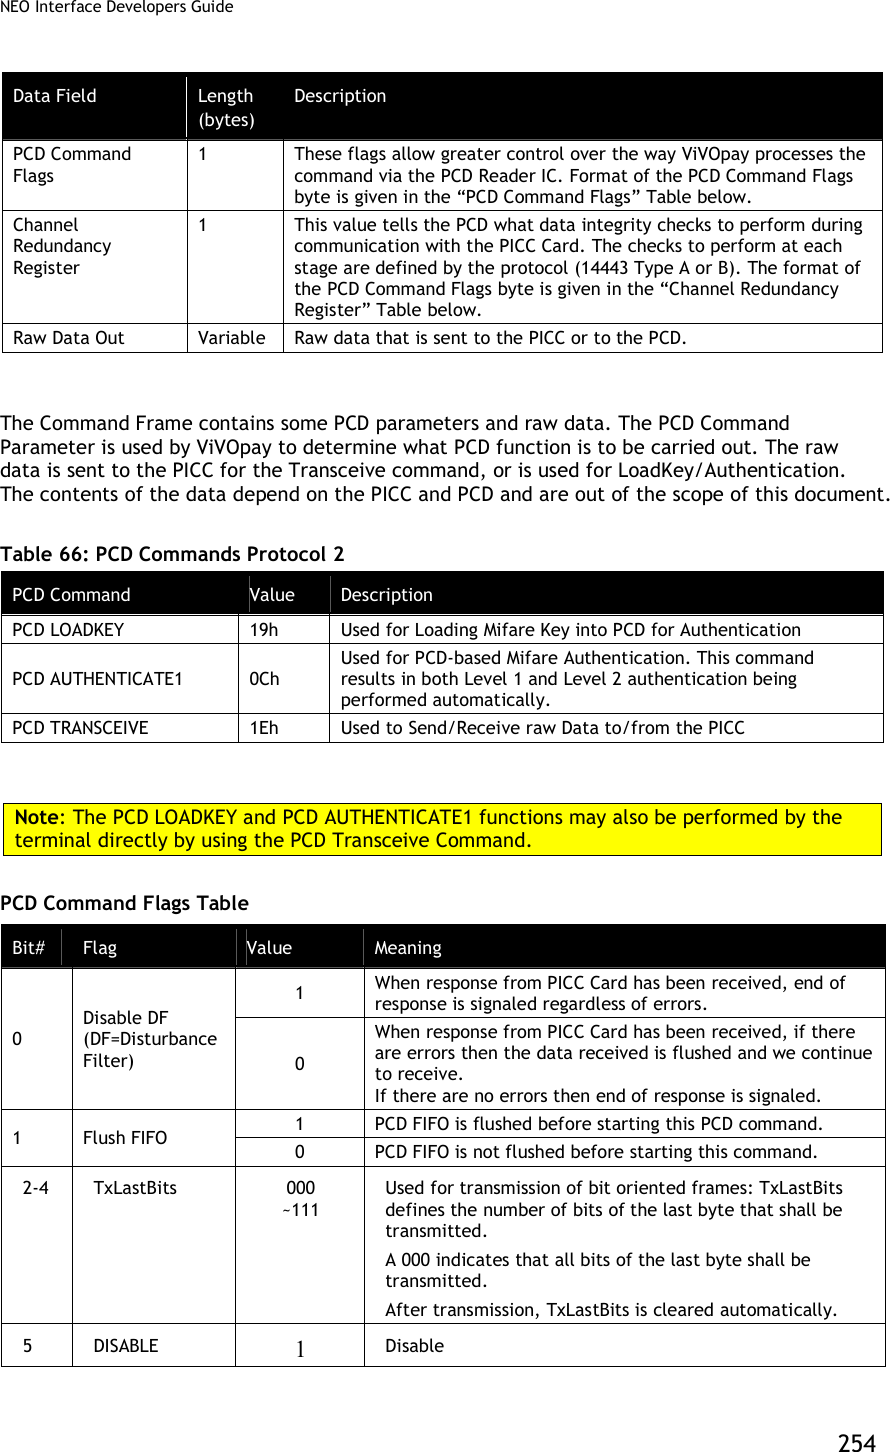 NEO Interface Developers Guide           254 Data Field  Length (bytes) Description PCD Command Flags 1 These flags allow greater control over the way ViVOpay processes the command via the PCD Reader IC. Format of the PCD Command Flags byte is given in the “PCD Command Flags” Table below. Channel Redundancy Register 1 This value tells the PCD what data integrity checks to perform during communication with the PICC Card. The checks to perform at each stage are defined by the protocol (14443 Type A or B). The format of the PCD Command Flags byte is given in the “Channel Redundancy Register” Table below. Raw Data Out Variable Raw data that is sent to the PICC or to the PCD.  The Command Frame contains some PCD parameters and raw data. The PCD Command Parameter is used by ViVOpay to determine what PCD function is to be carried out. The raw data is sent to the PICC for the Transceive command, or is used for LoadKey/Authentication. The contents of the data depend on the PICC and PCD and are out of the scope of this document.  Table 66: PCD Commands Protocol 2 PCD Command  Value  Description PCD LOADKEY 19h Used for Loading Mifare Key into PCD for Authentication PCD AUTHENTICATE1  0Ch Used for PCD-based Mifare Authentication. This command results in both Level 1 and Level 2 authentication being performed automatically. PCD TRANSCEIVE 1Eh Used to Send/Receive raw Data to/from the PICC  Note: The PCD LOADKEY and PCD AUTHENTICATE1 functions may also be performed by the terminal directly by using the PCD Transceive Command. PCD Command Flags Table Bit#  Flag  Value  Meaning 0 Disable DF (DF=Disturbance Filter) 1 When response from PICC Card has been received, end of response is signaled regardless of errors. 0 When response from PICC Card has been received, if there are errors then the data received is flushed and we continue to receive.  If there are no errors then end of response is signaled. 1  Flush FIFO 1 PCD FIFO is flushed before starting this PCD command. 0 PCD FIFO is not flushed before starting this command. 2-4 TxLastBits  000 ~111 Used for transmission of bit oriented frames: TxLastBits defines the number of bits of the last byte that shall be transmitted.  A 000 indicates that all bits of the last byte shall be transmitted. After transmission, TxLastBits is cleared automatically. 5  DISABLE  1  Disable 